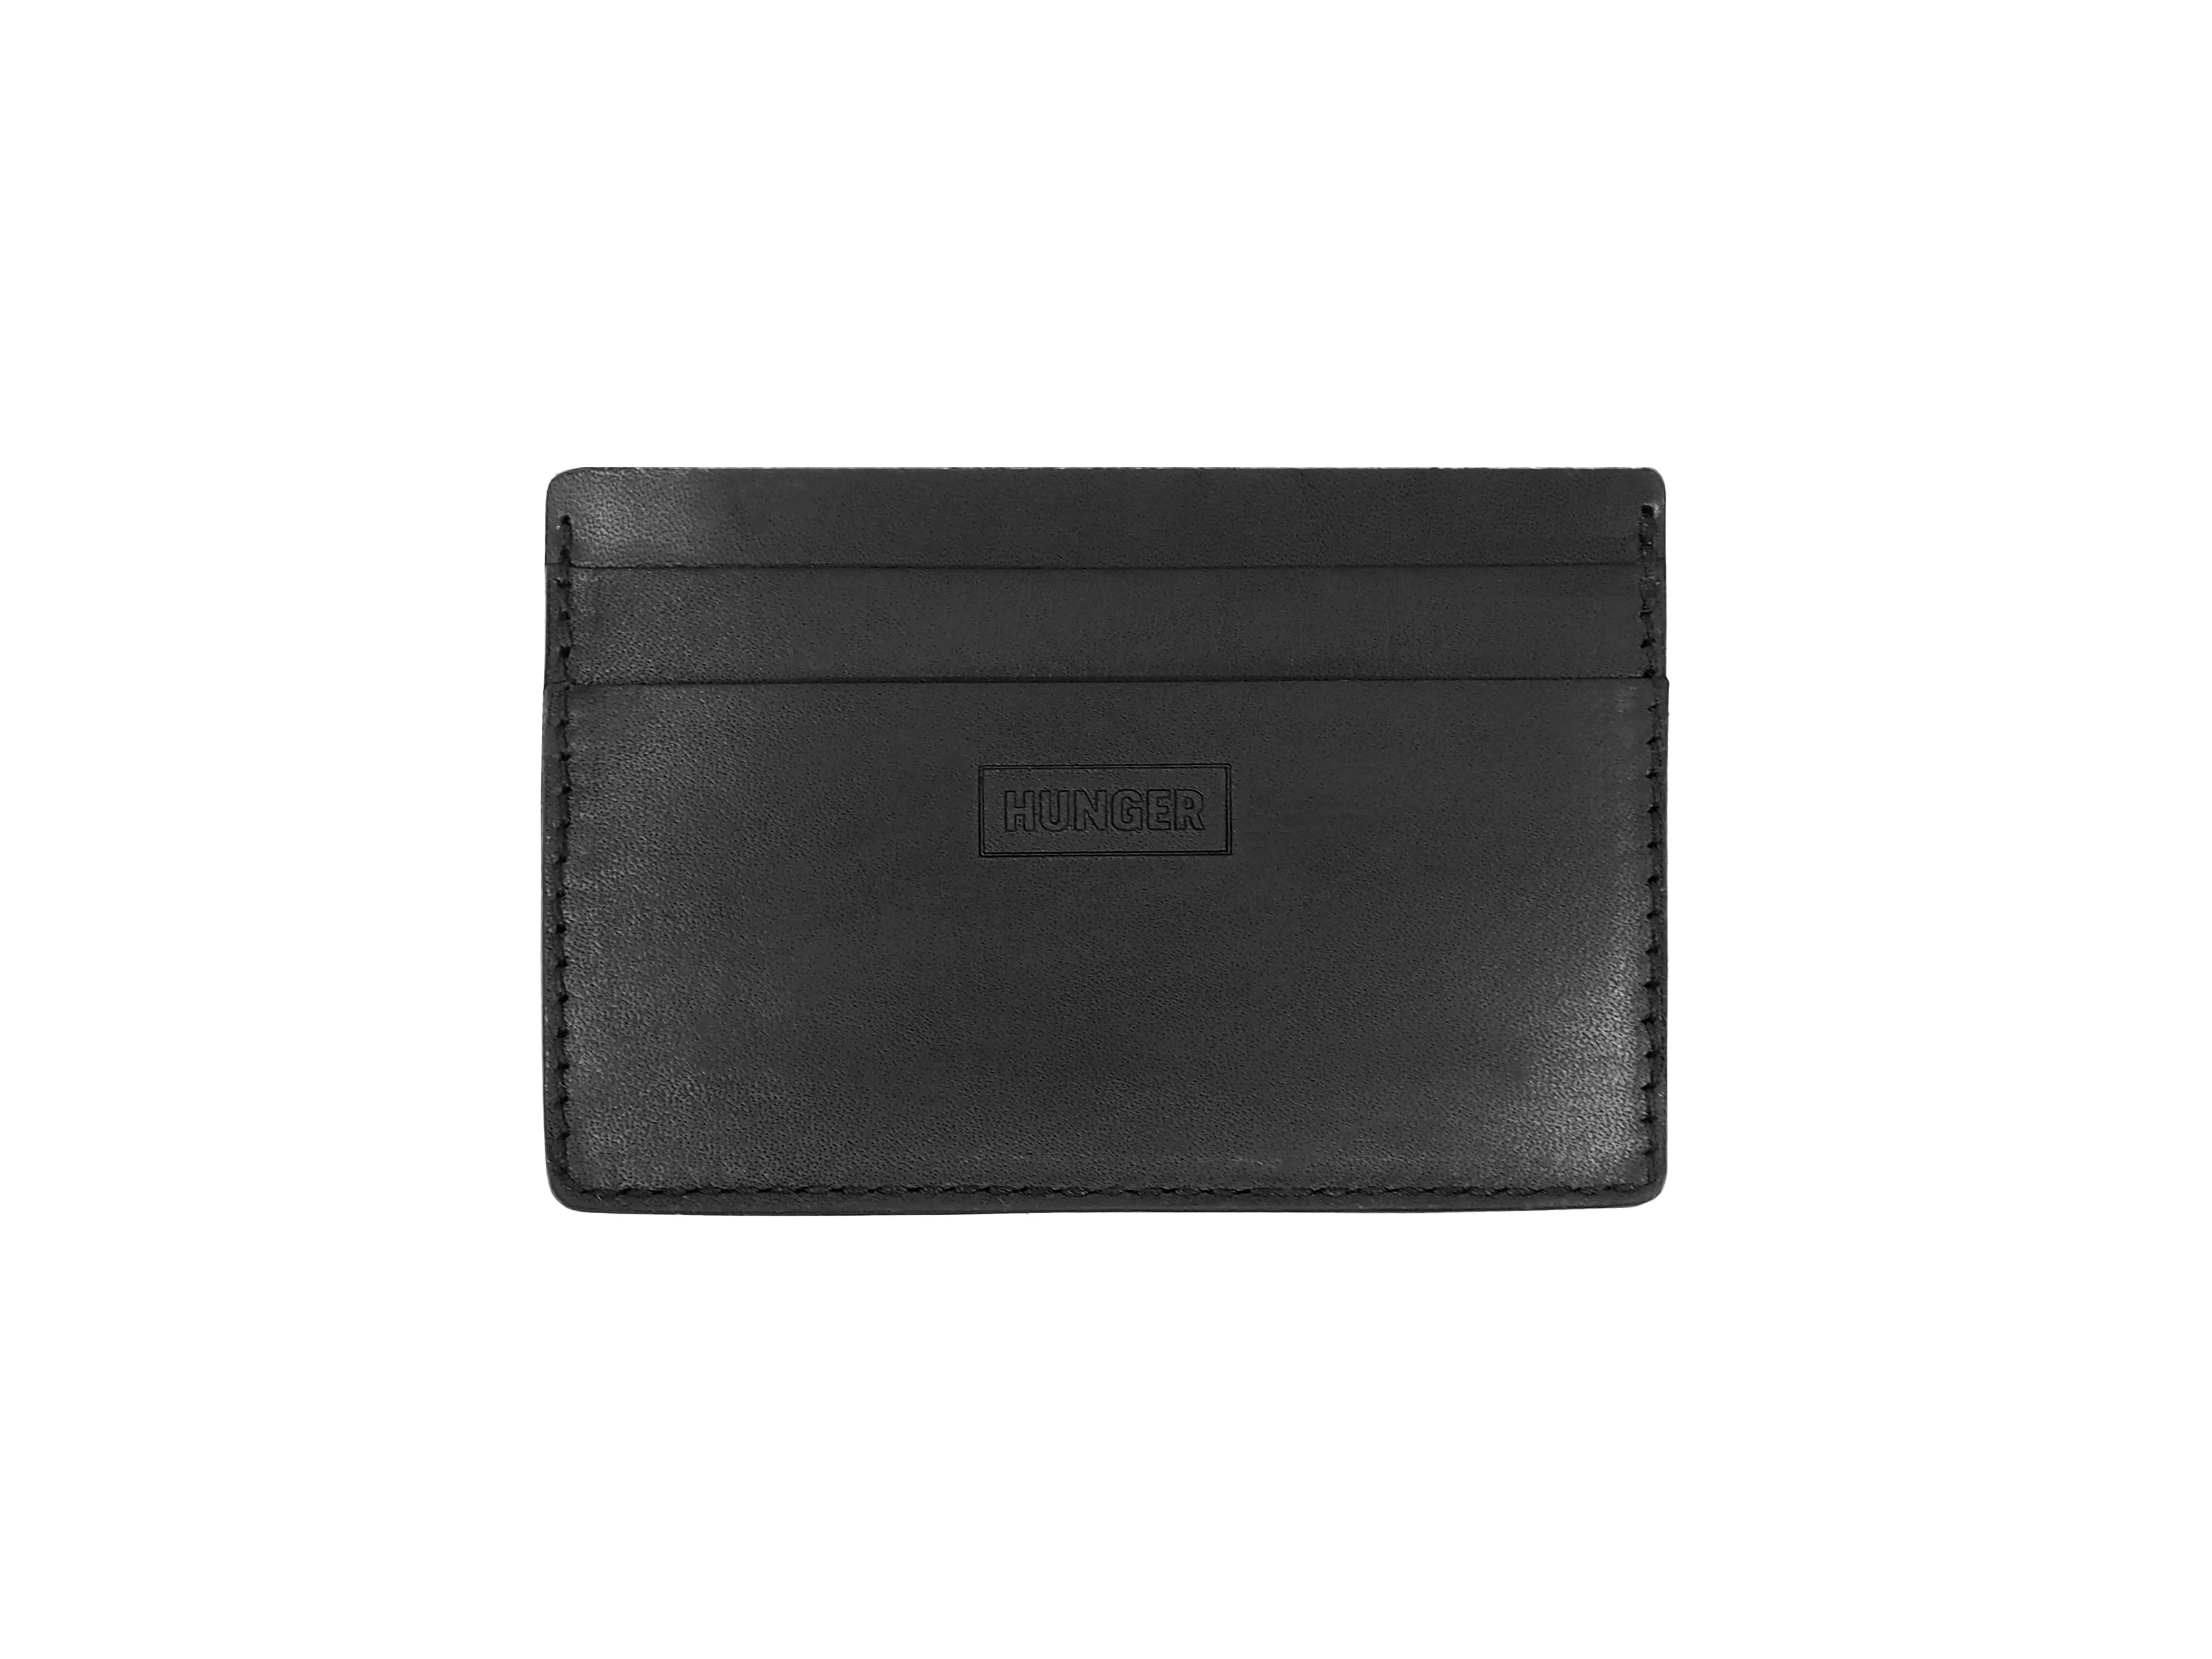  HANDMADE LEATHER CARDHOLDER hunger.93 Accessoire %price 